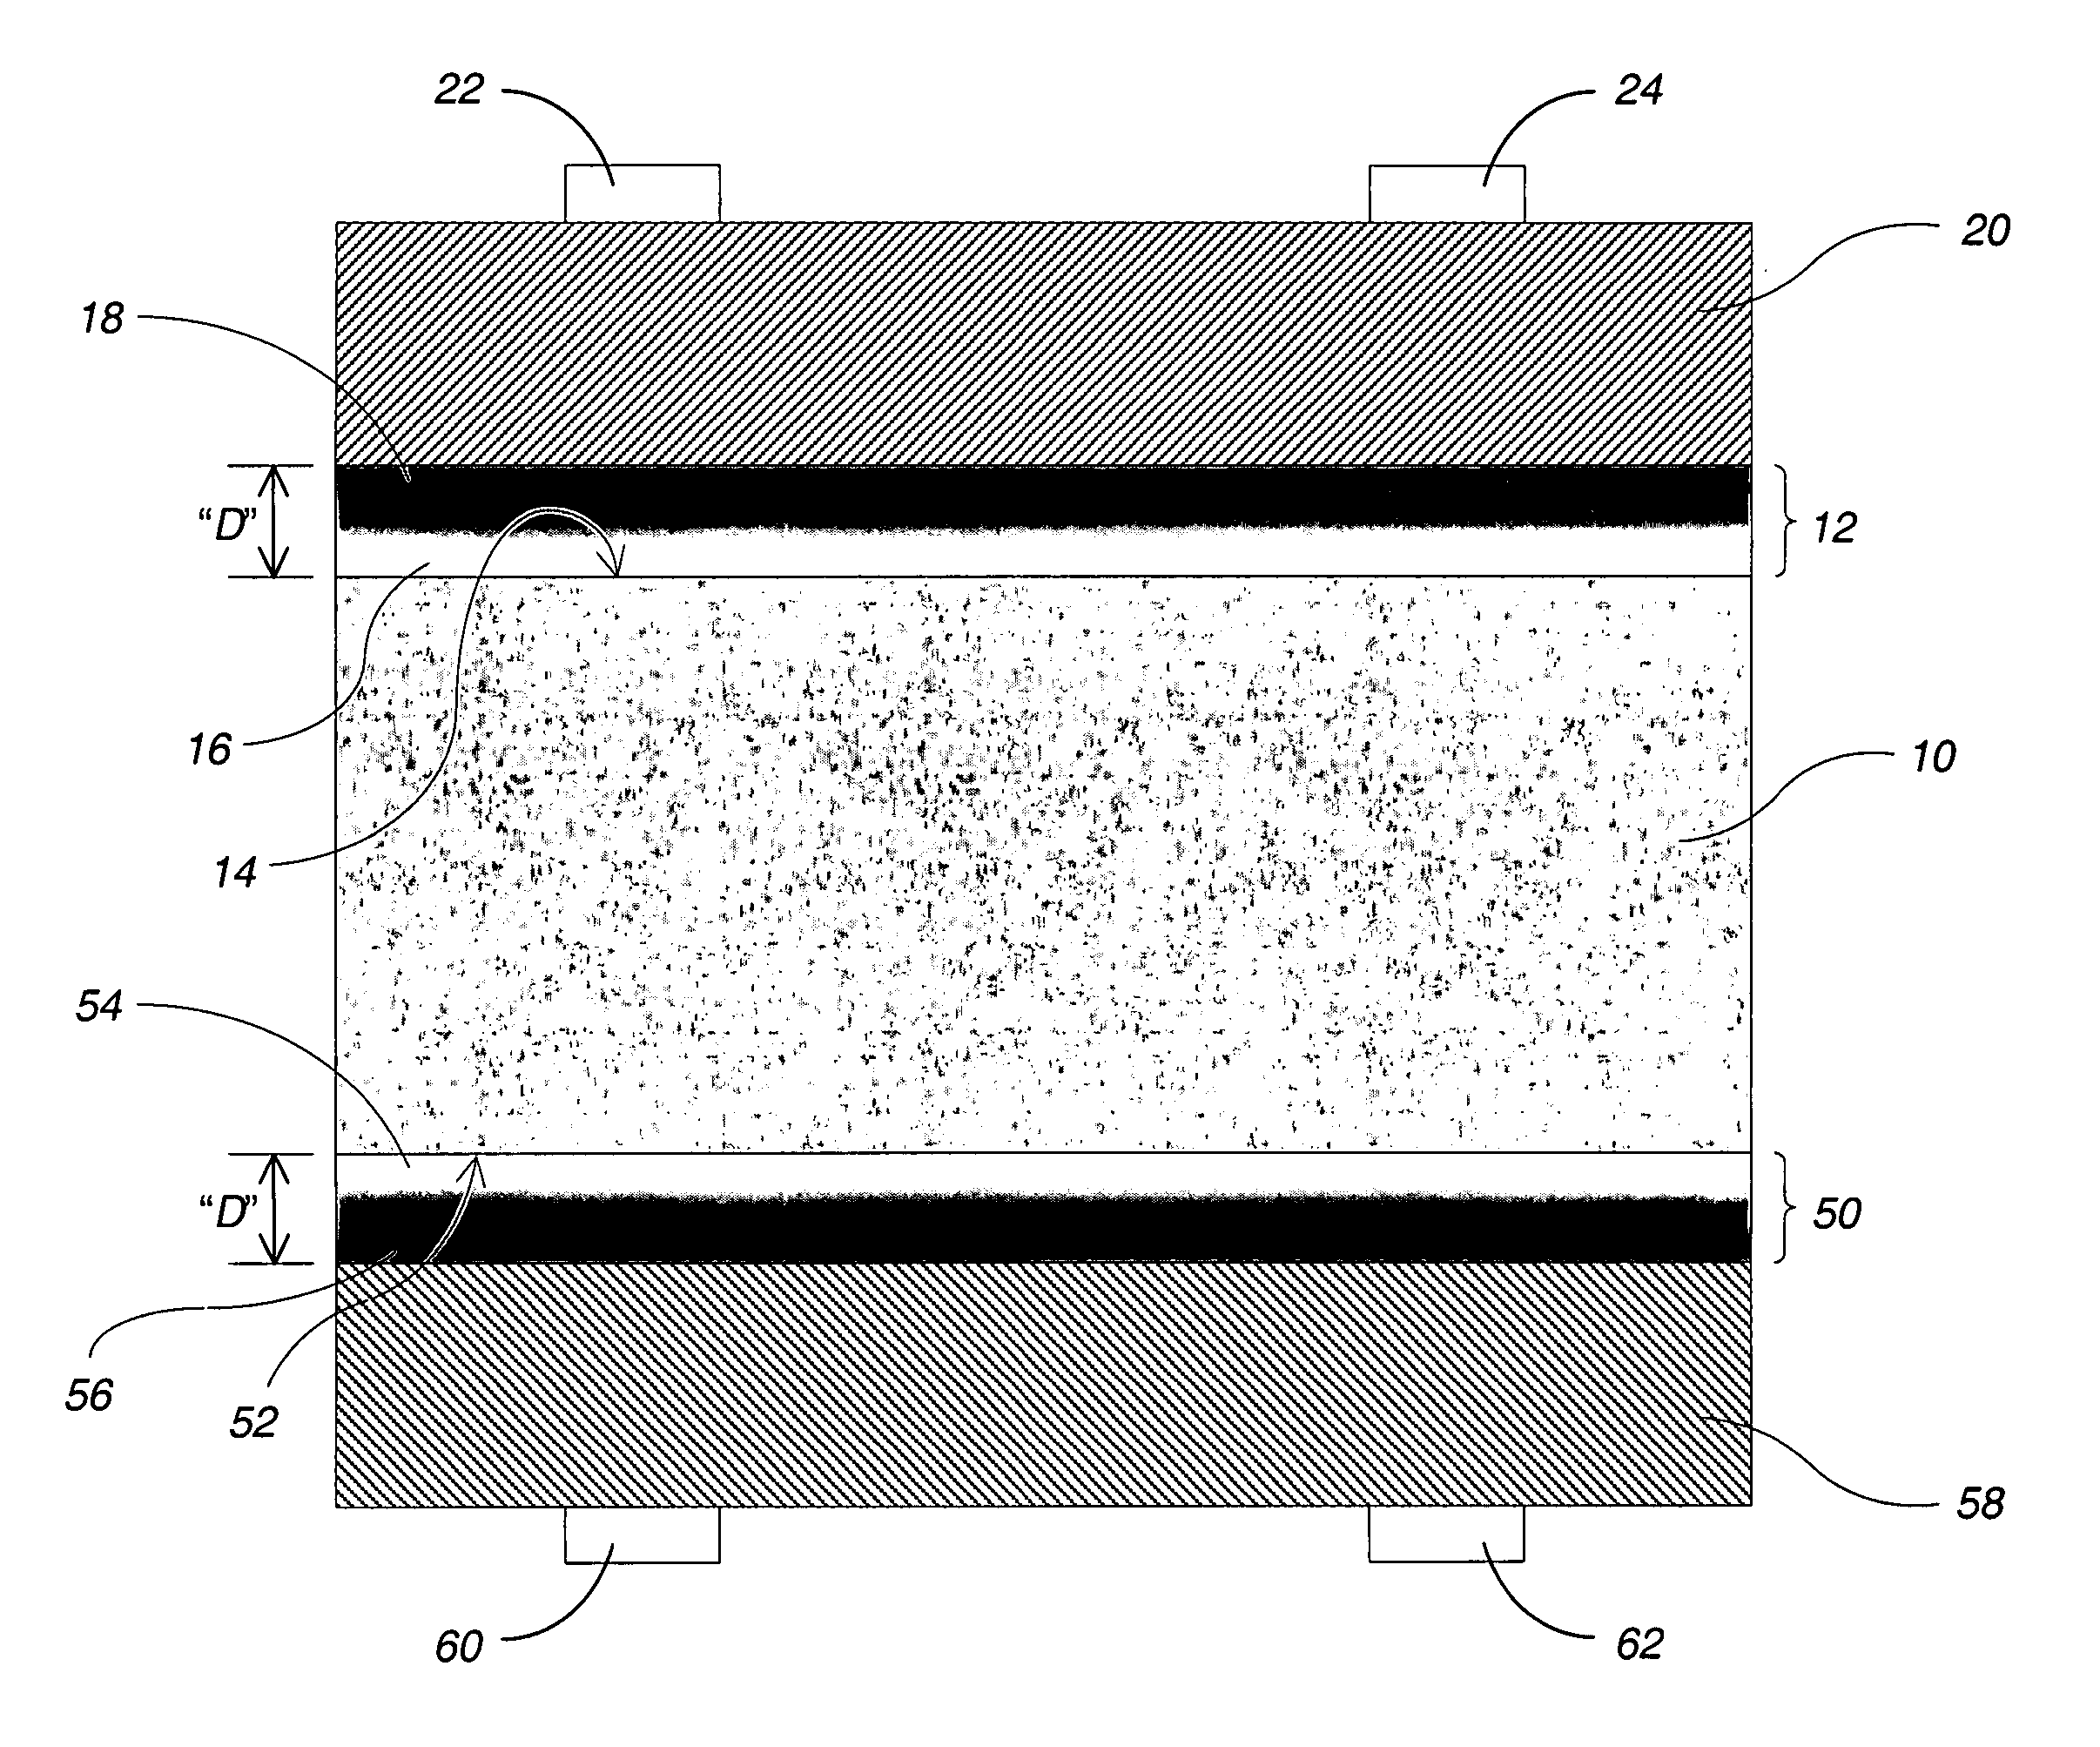 Compositionally-graded photovoltaic device and fabrication method, and related articles